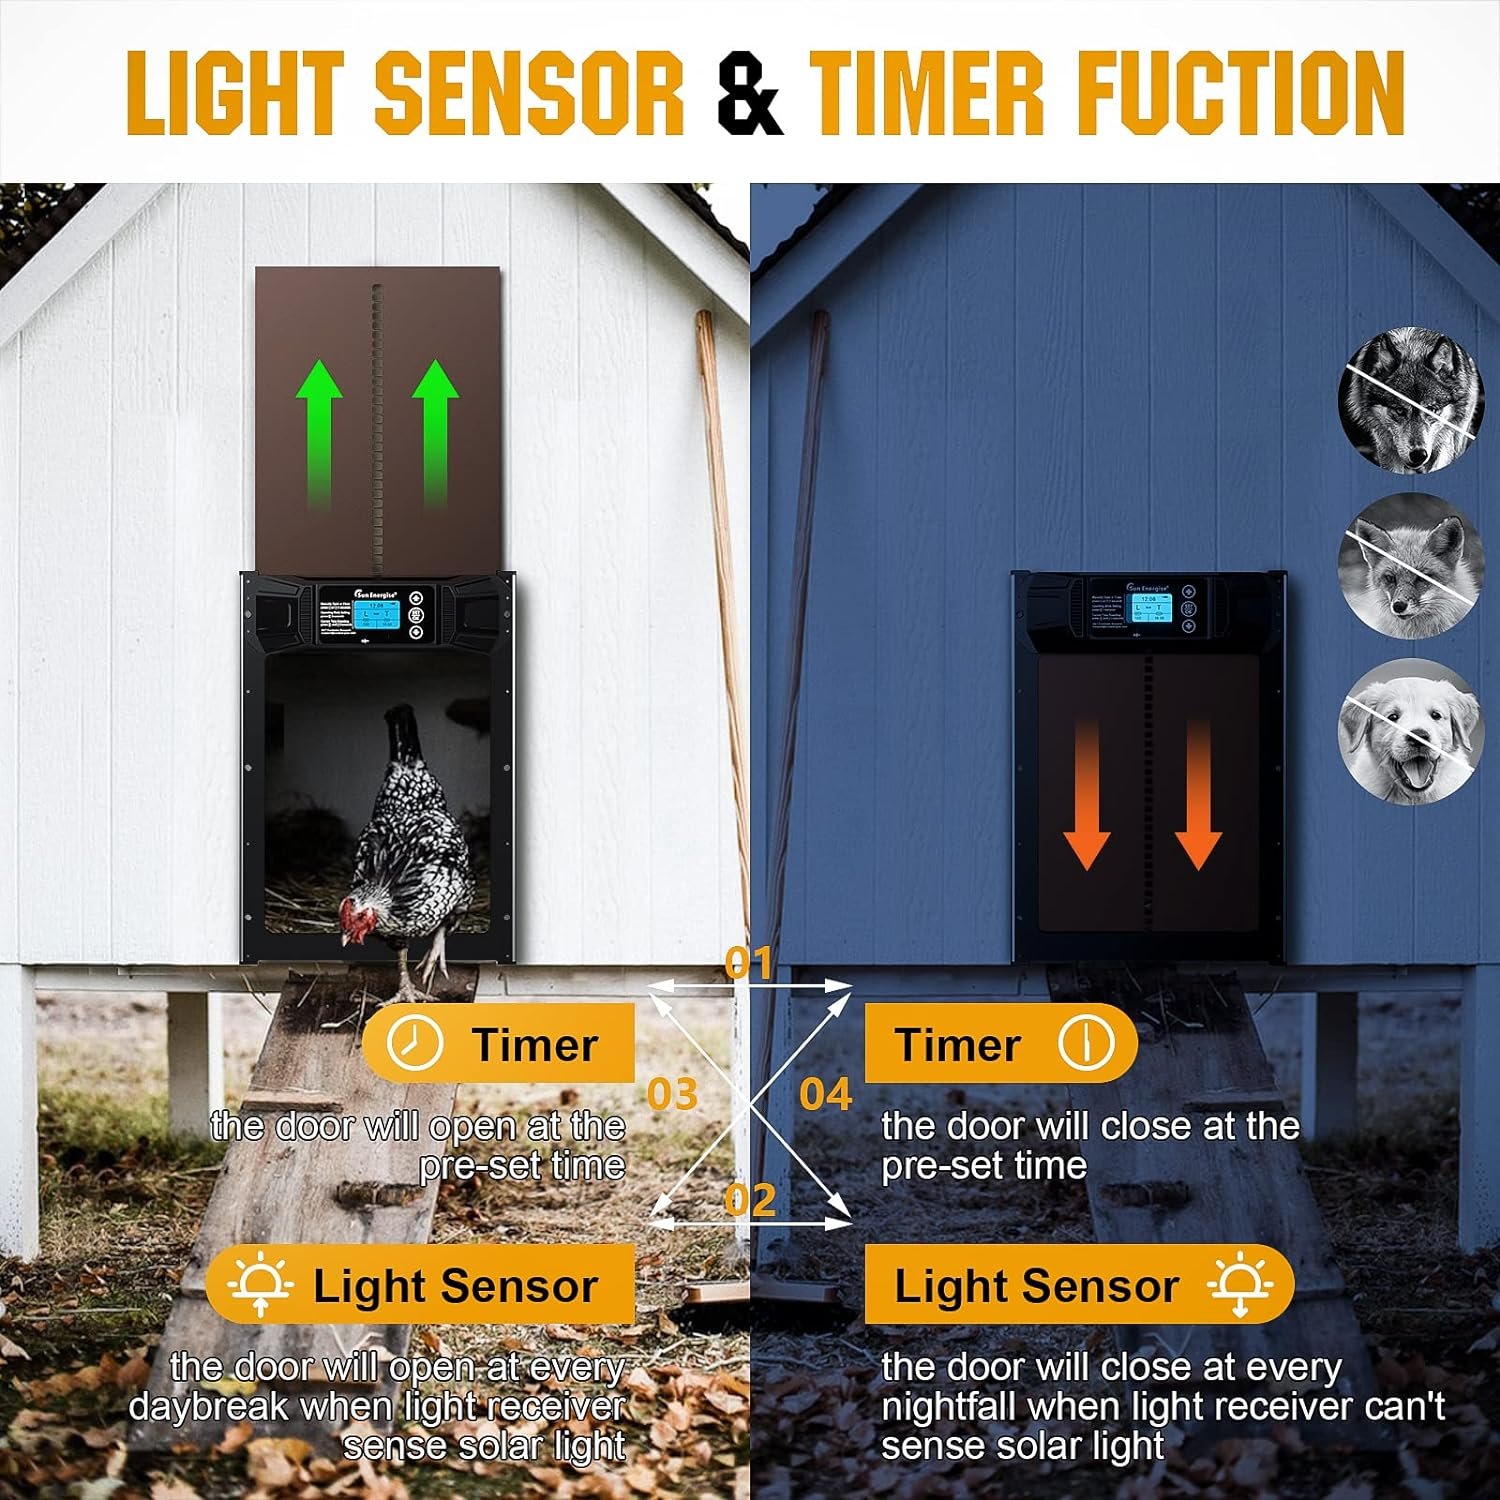 Sun Energise Automatic Chicken Coop Door Opener with Timer  Light Sensor, Auto Chicken Coop Door with Large LCD Display, Anti-Pinch Design for Chicken House Farms